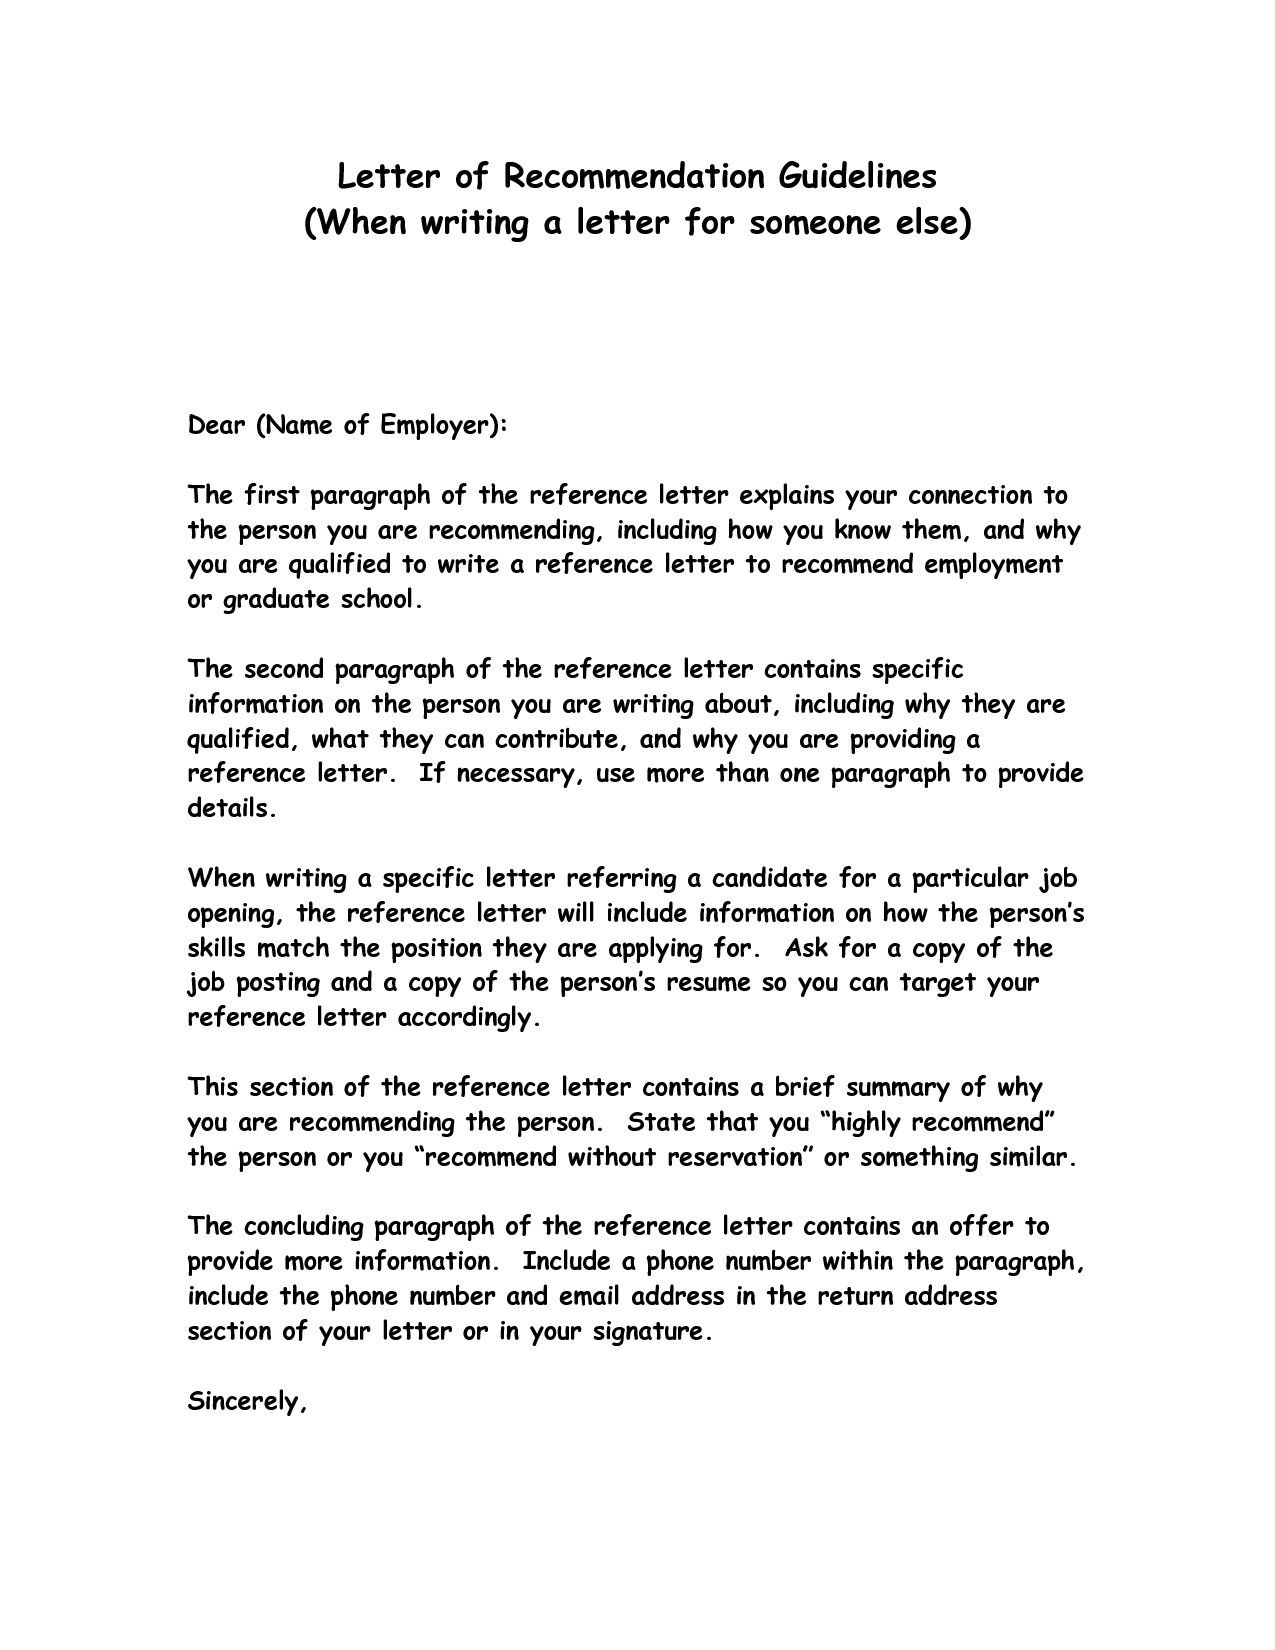 Writing Your Own Letter Of Recommendation Template - How to Write A Reference Letter Letter